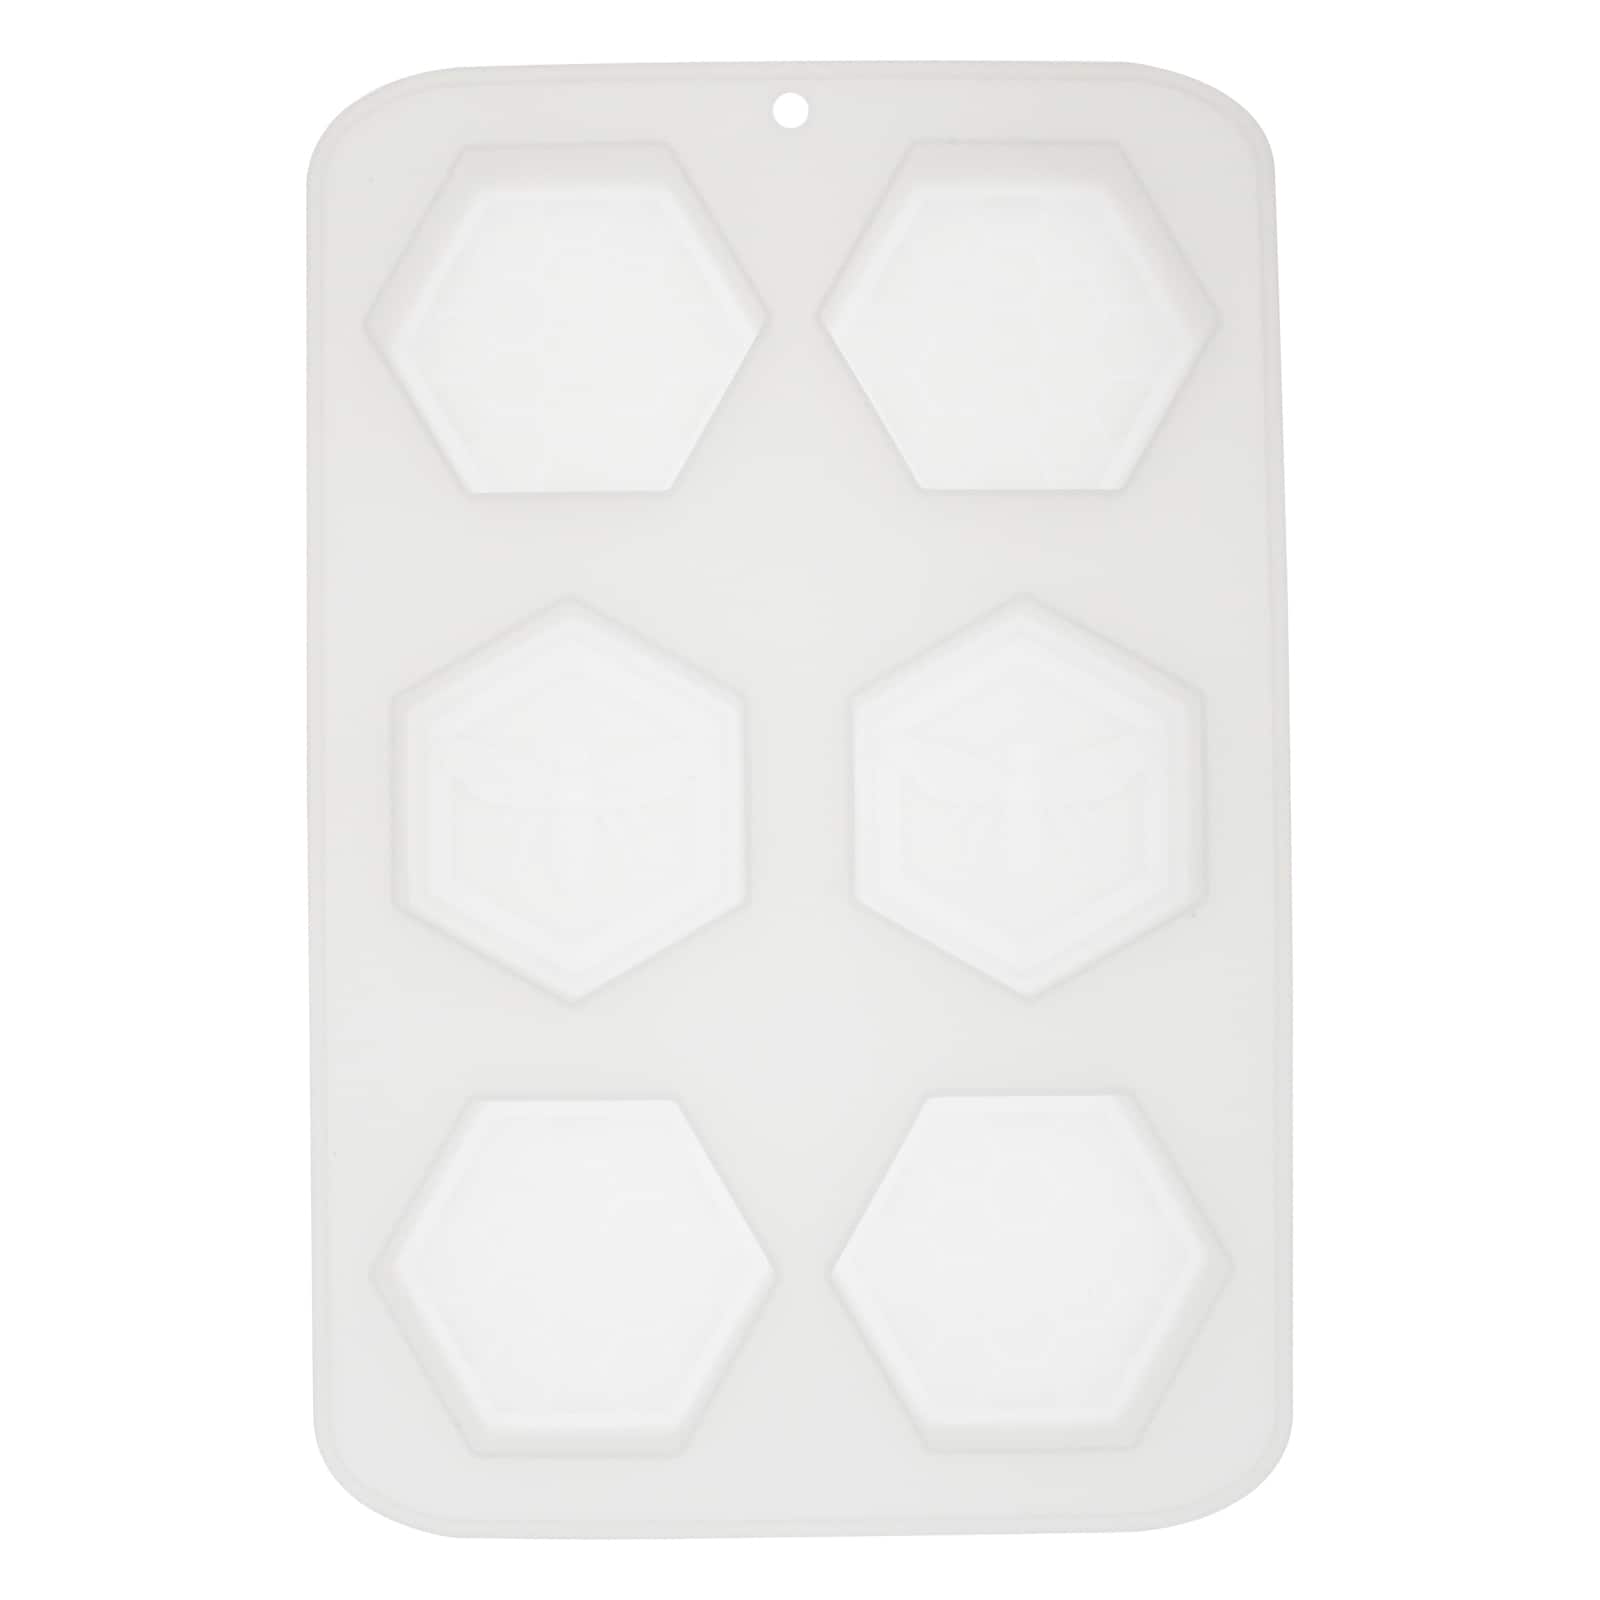 Silicone Honeycomb Soap Mold by Make Market | Michaels